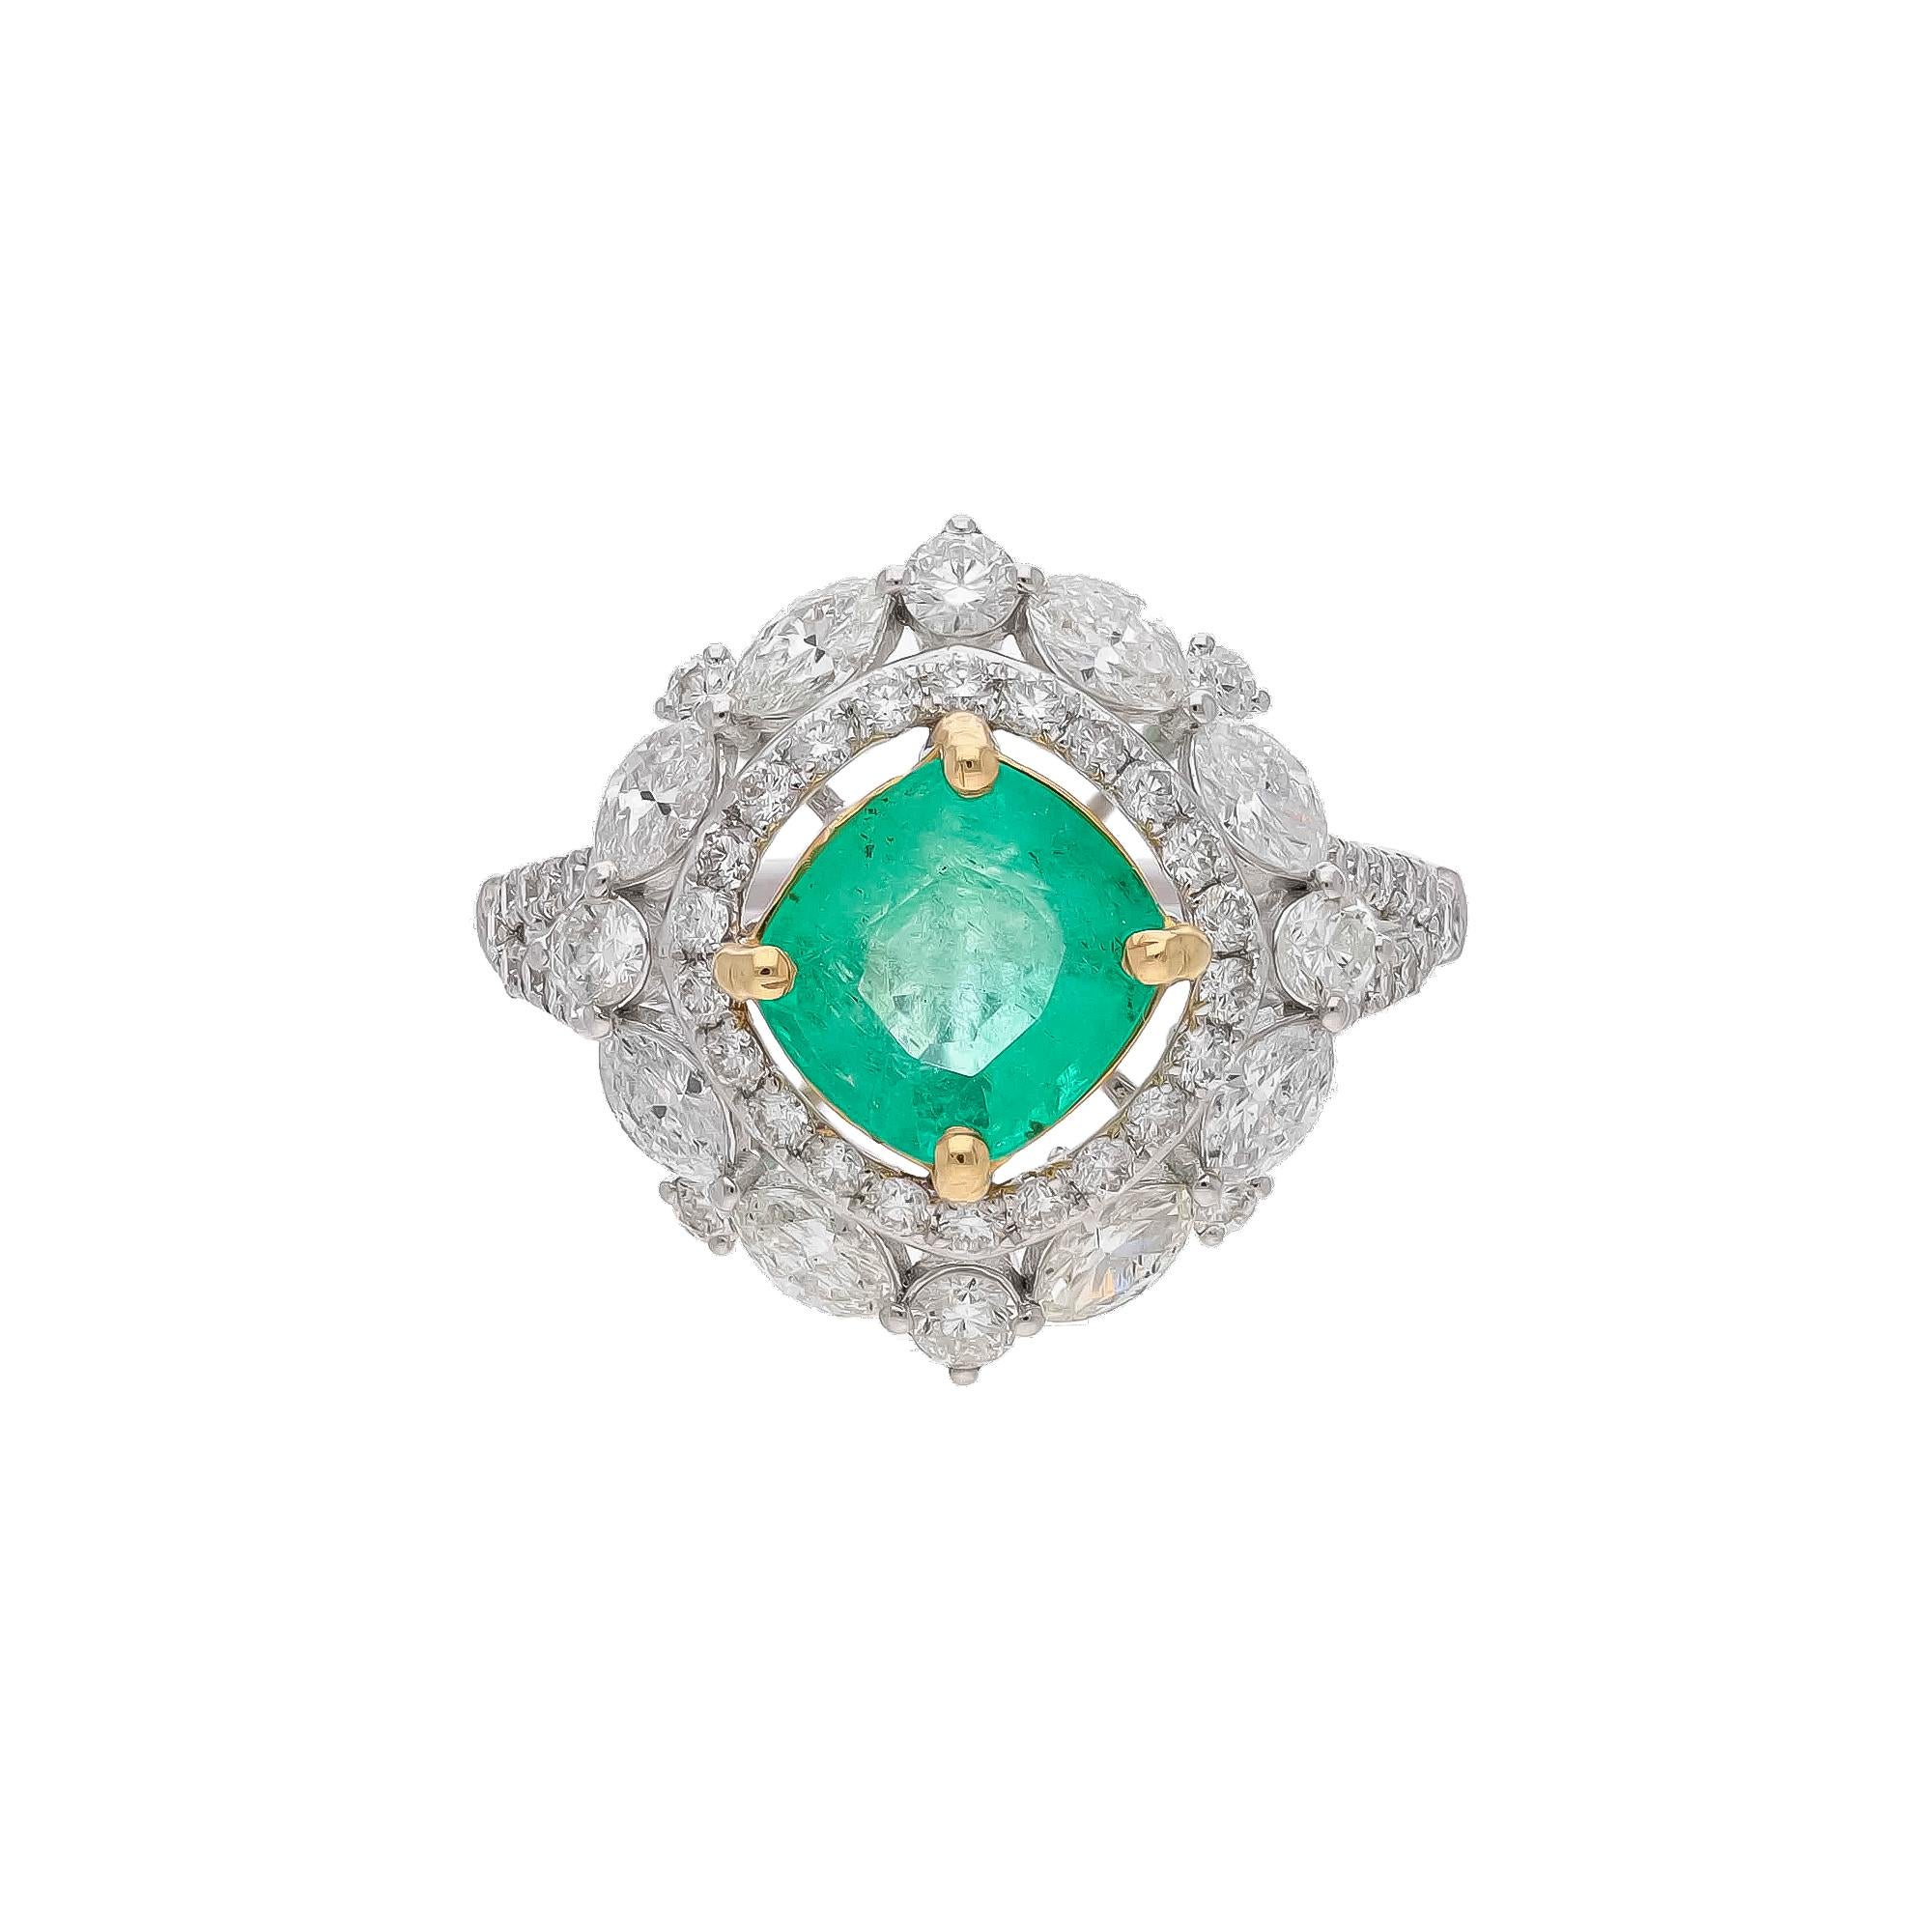 Diamonds : 1.46 carats
Emerald : 1.64 carats
Gold : 4.01 gm( 18k)

This is a beautiful natural columbian emerald ring with very high quality emeralds and diamonds ( vsi and G colour

Its very hard to capture the true color and luster of the stone, I